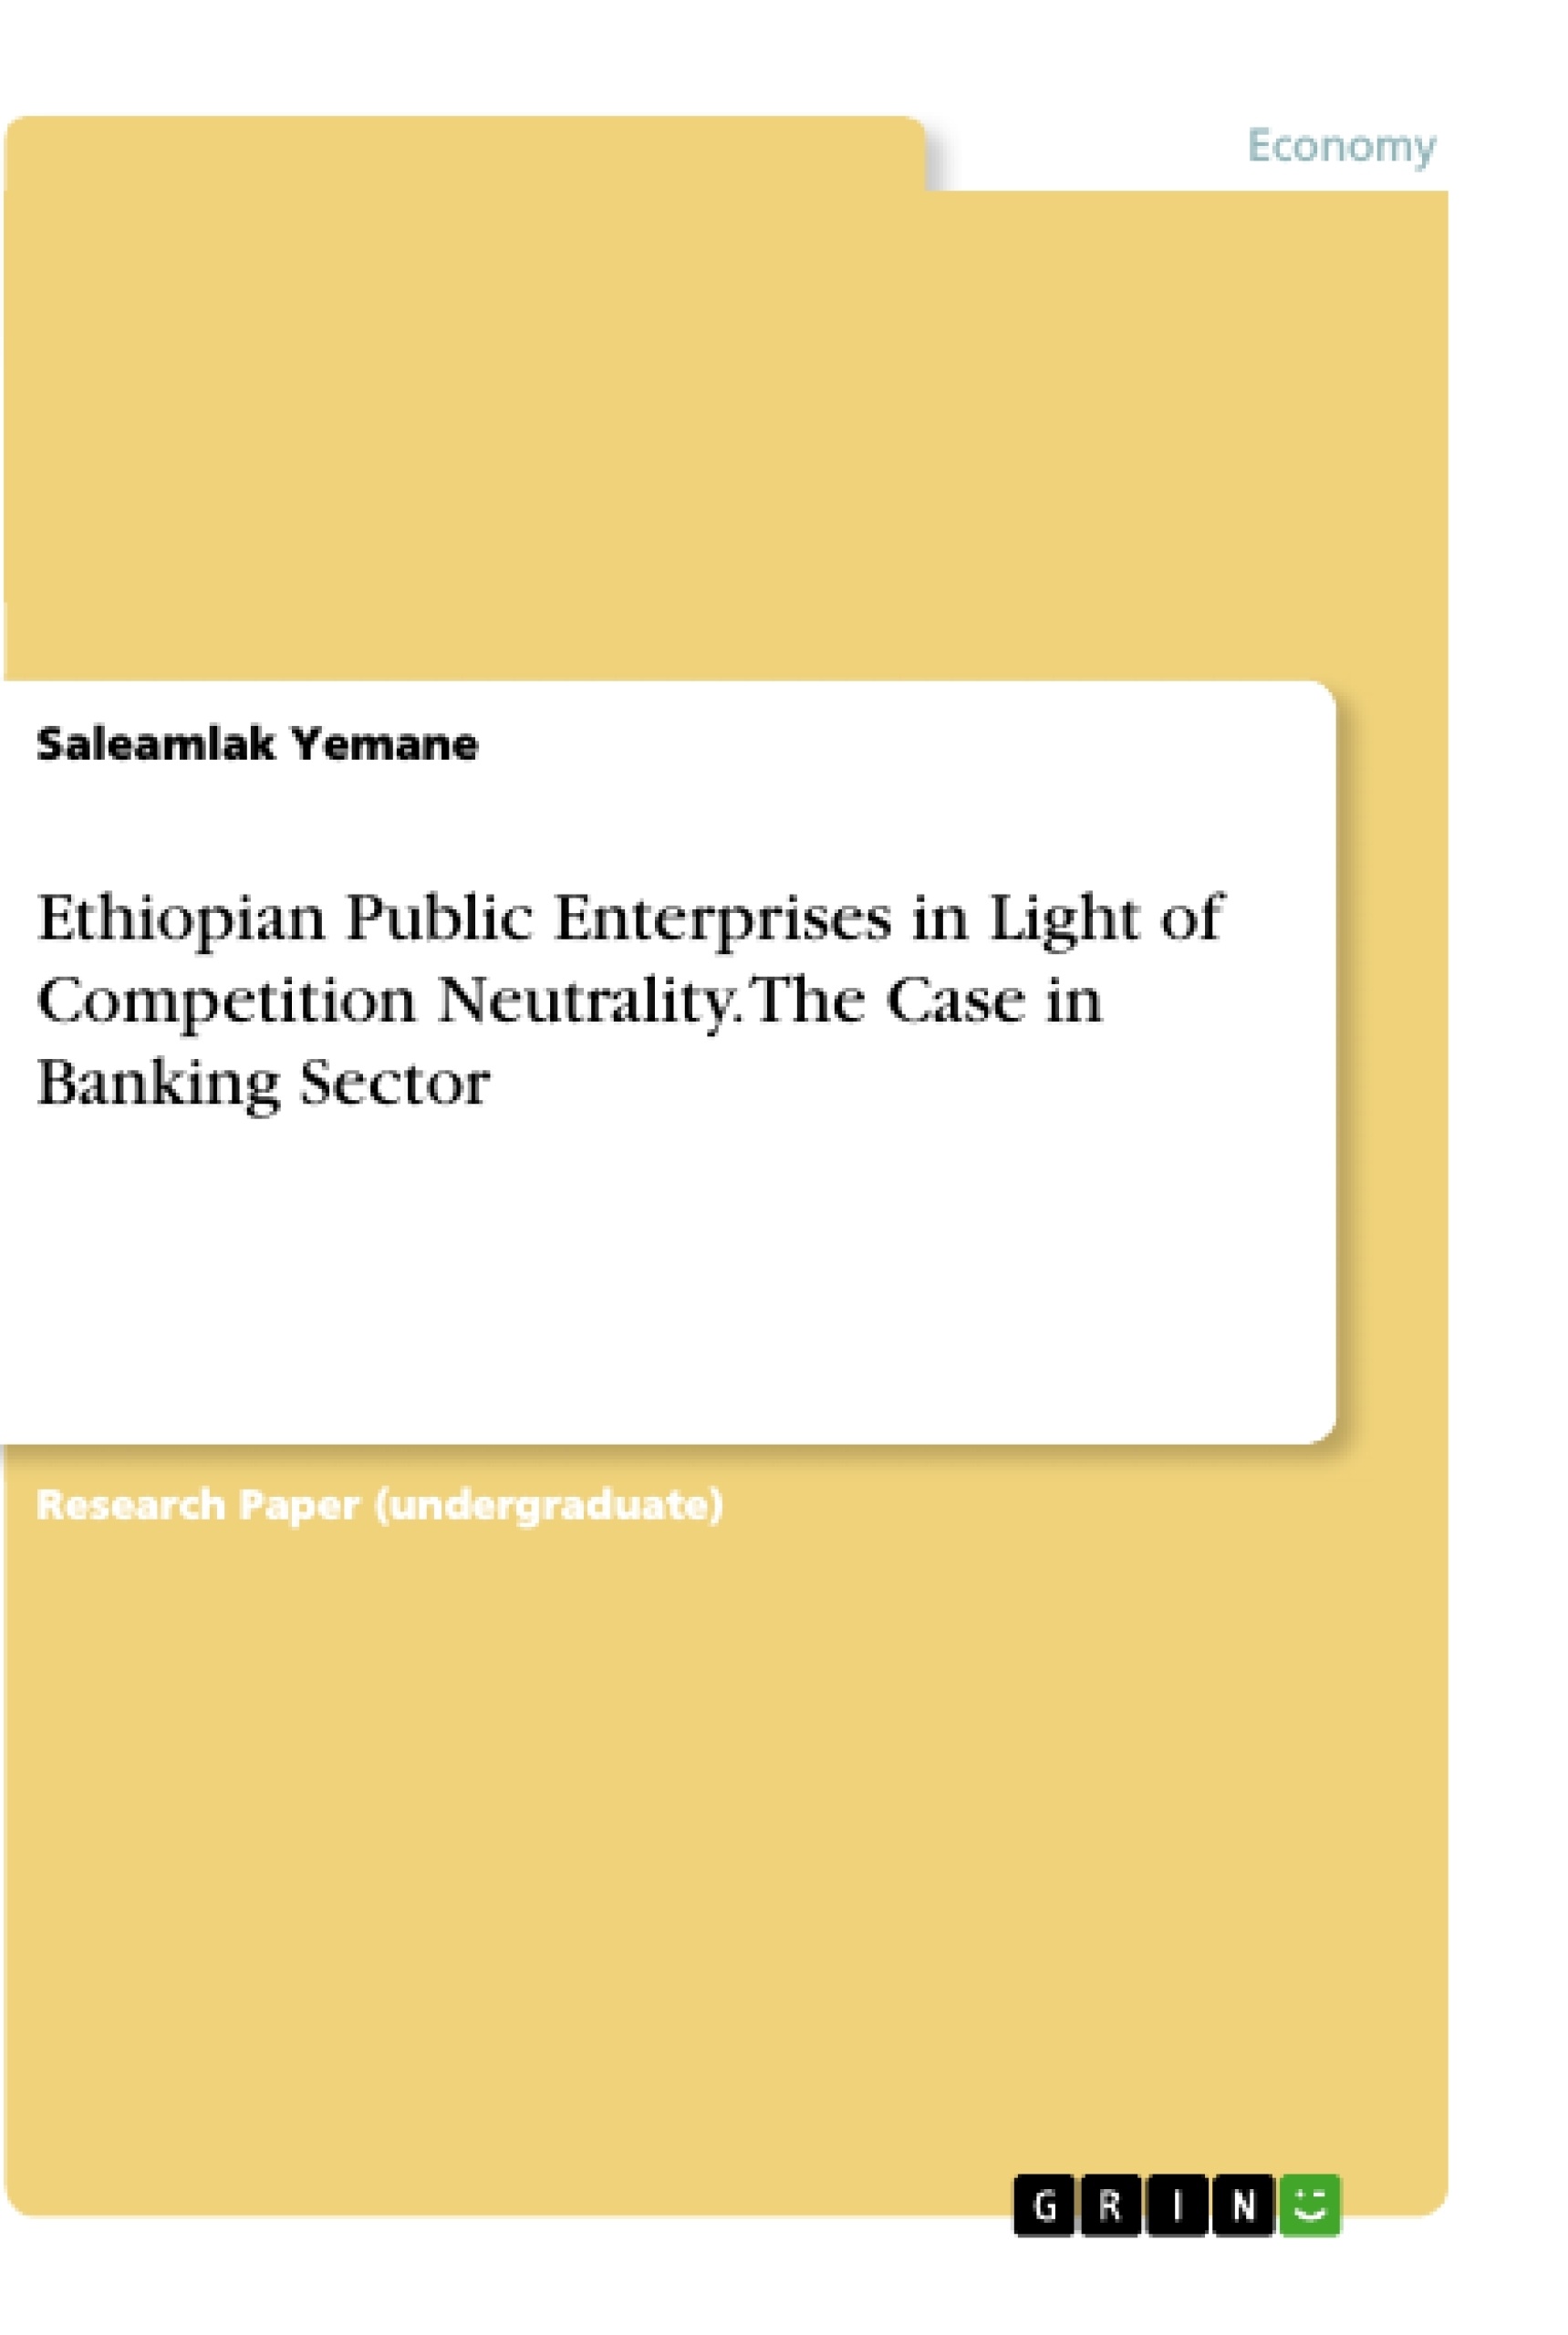 Título: Ethiopian Public Enterprises in Light of Competition Neutrality. The Case in Banking Sector